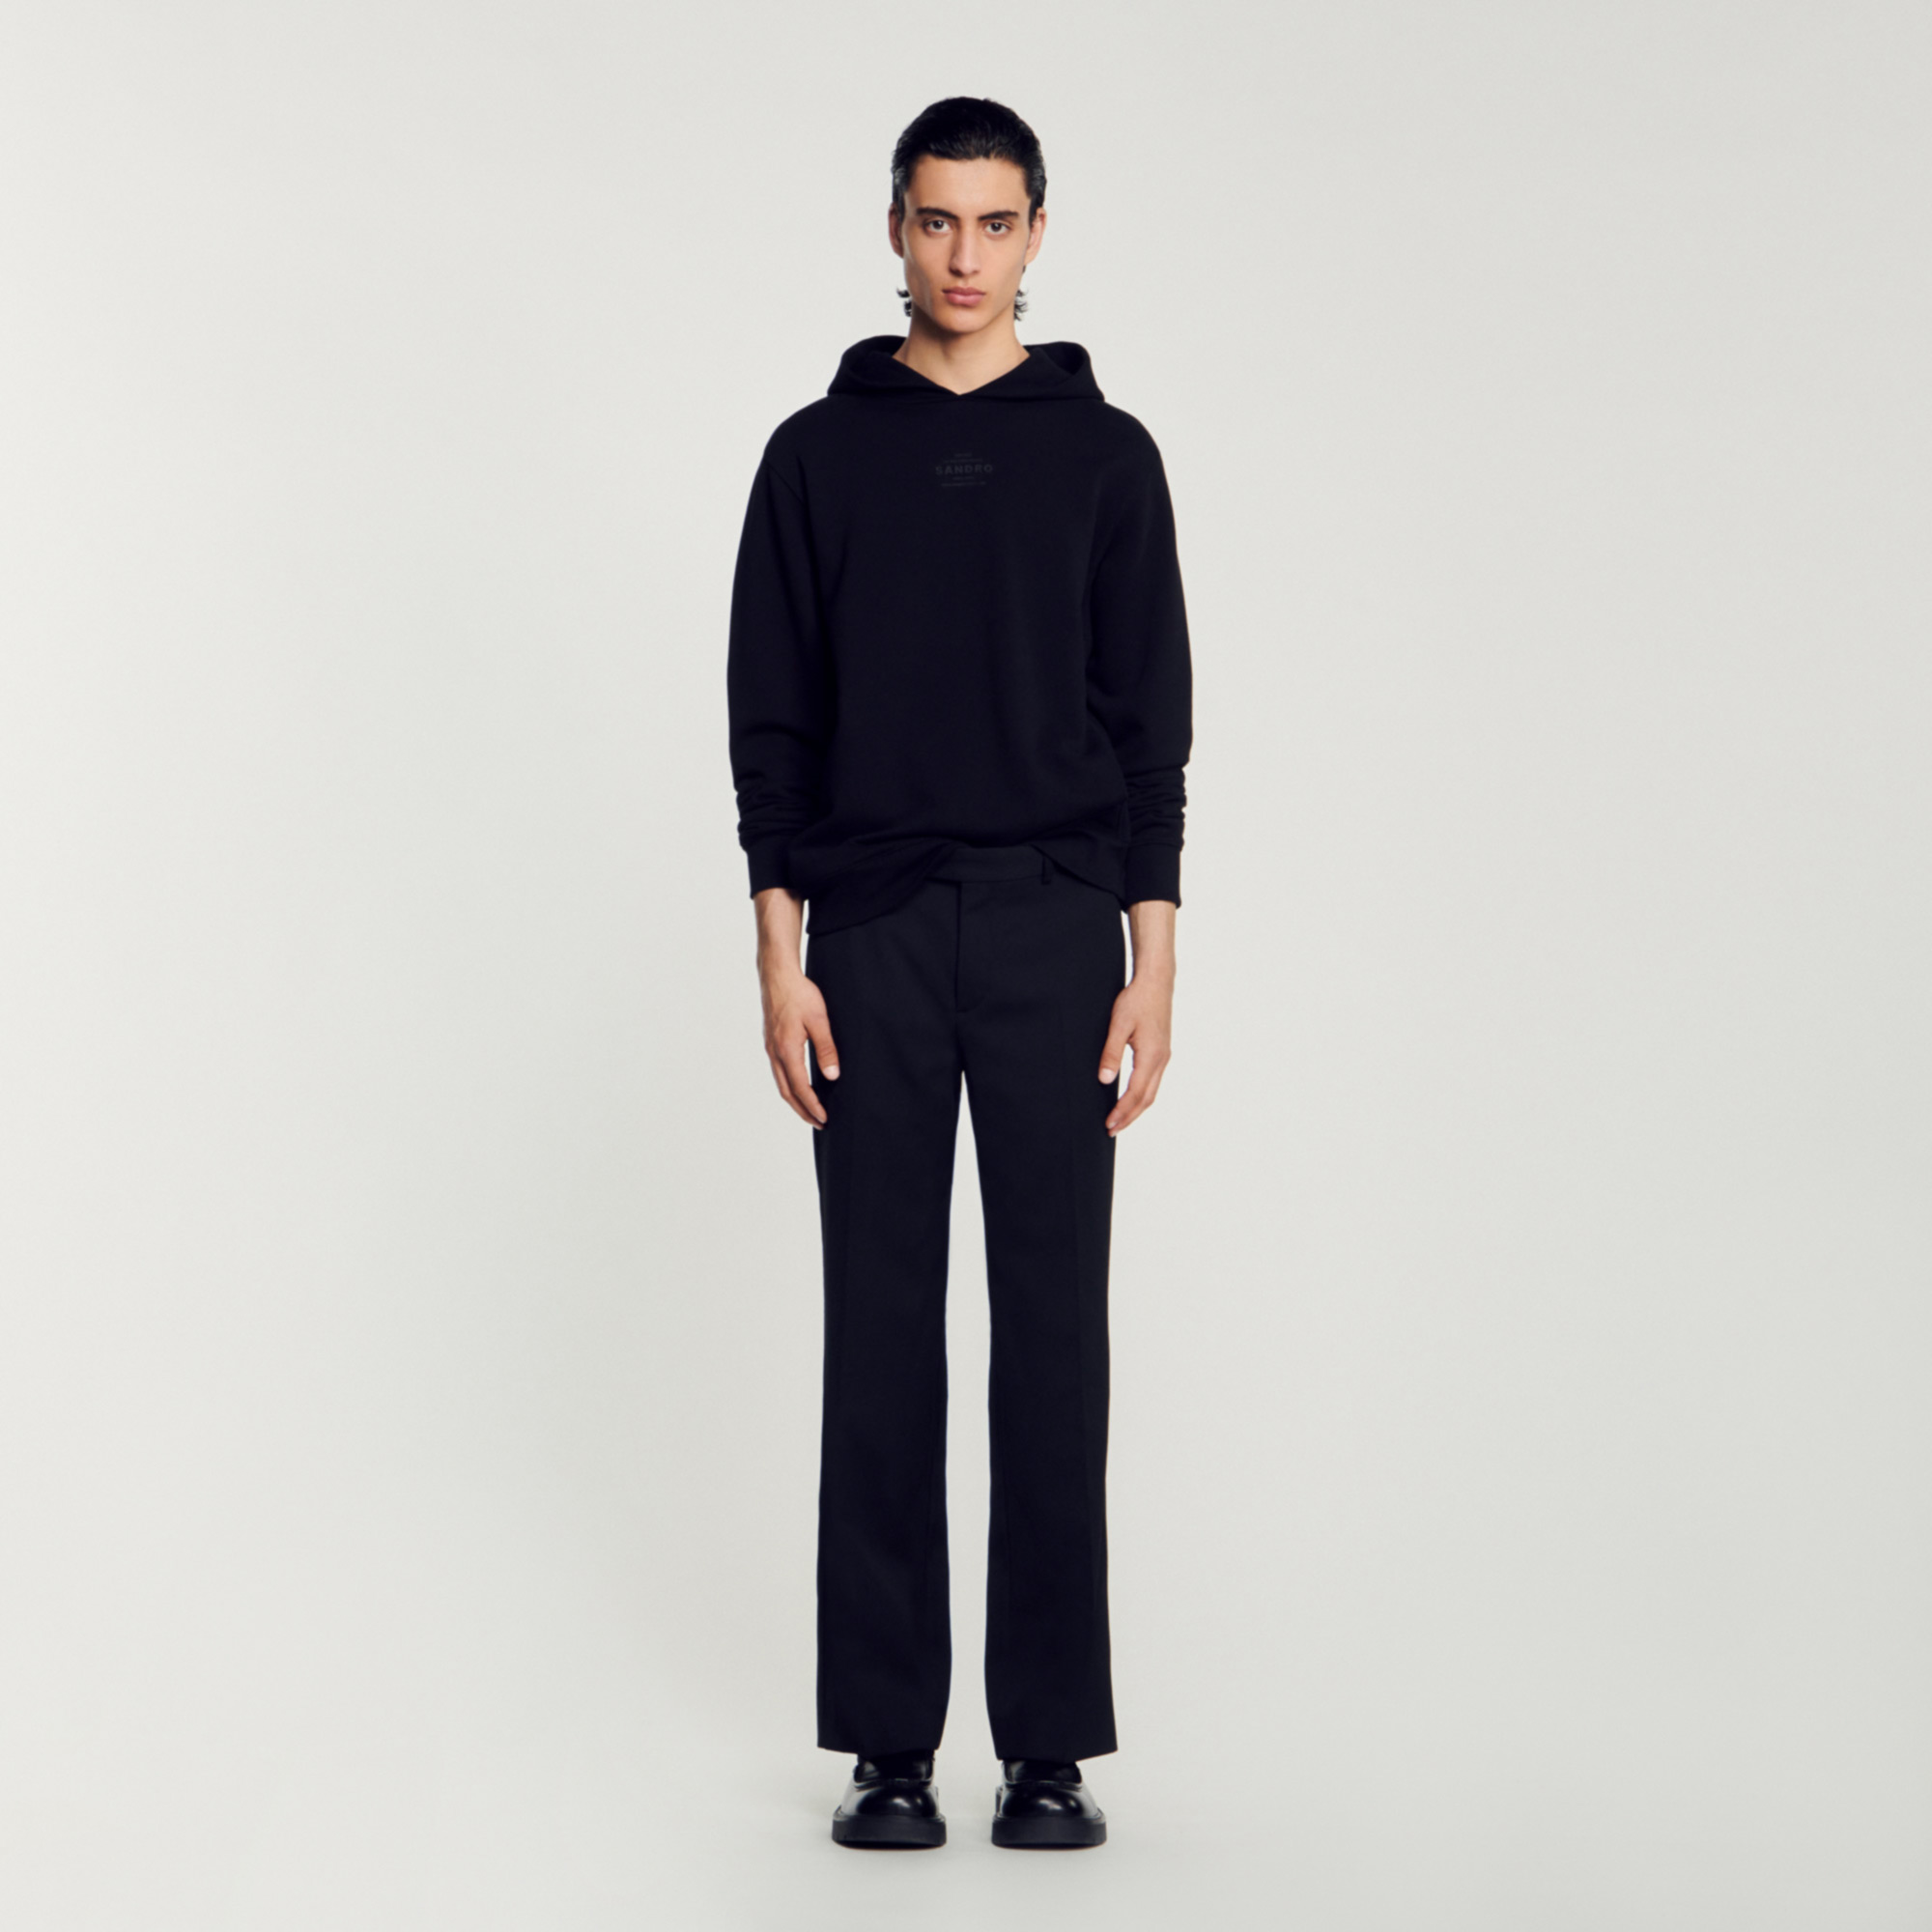 Sandro cotton Rib: Long-sleeved hooded sweatshirt decorated with the Sandro logo in rubber on the front